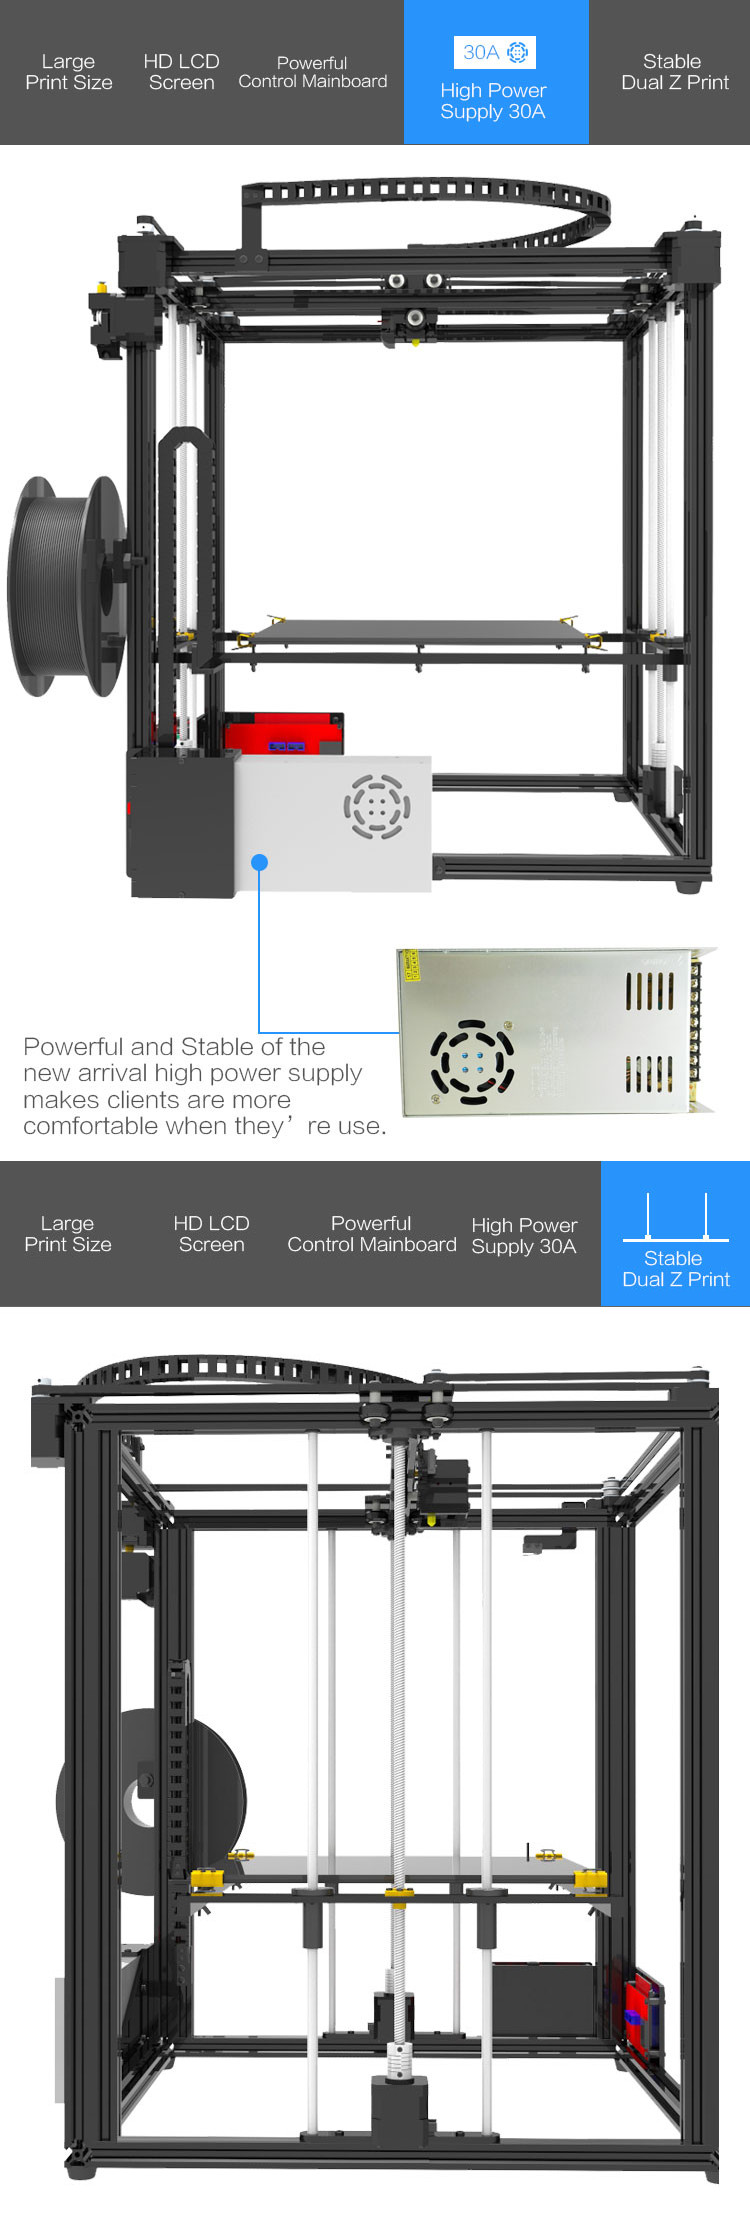 TRONXY® X5S-400 DIY Aluminum 3D Printer Kit 400*400*400mm Large Printing Size With Dual Z-axis Rod/HD LCD Screen/Double Fan 1.75mm 0.4mm Nozzle 19